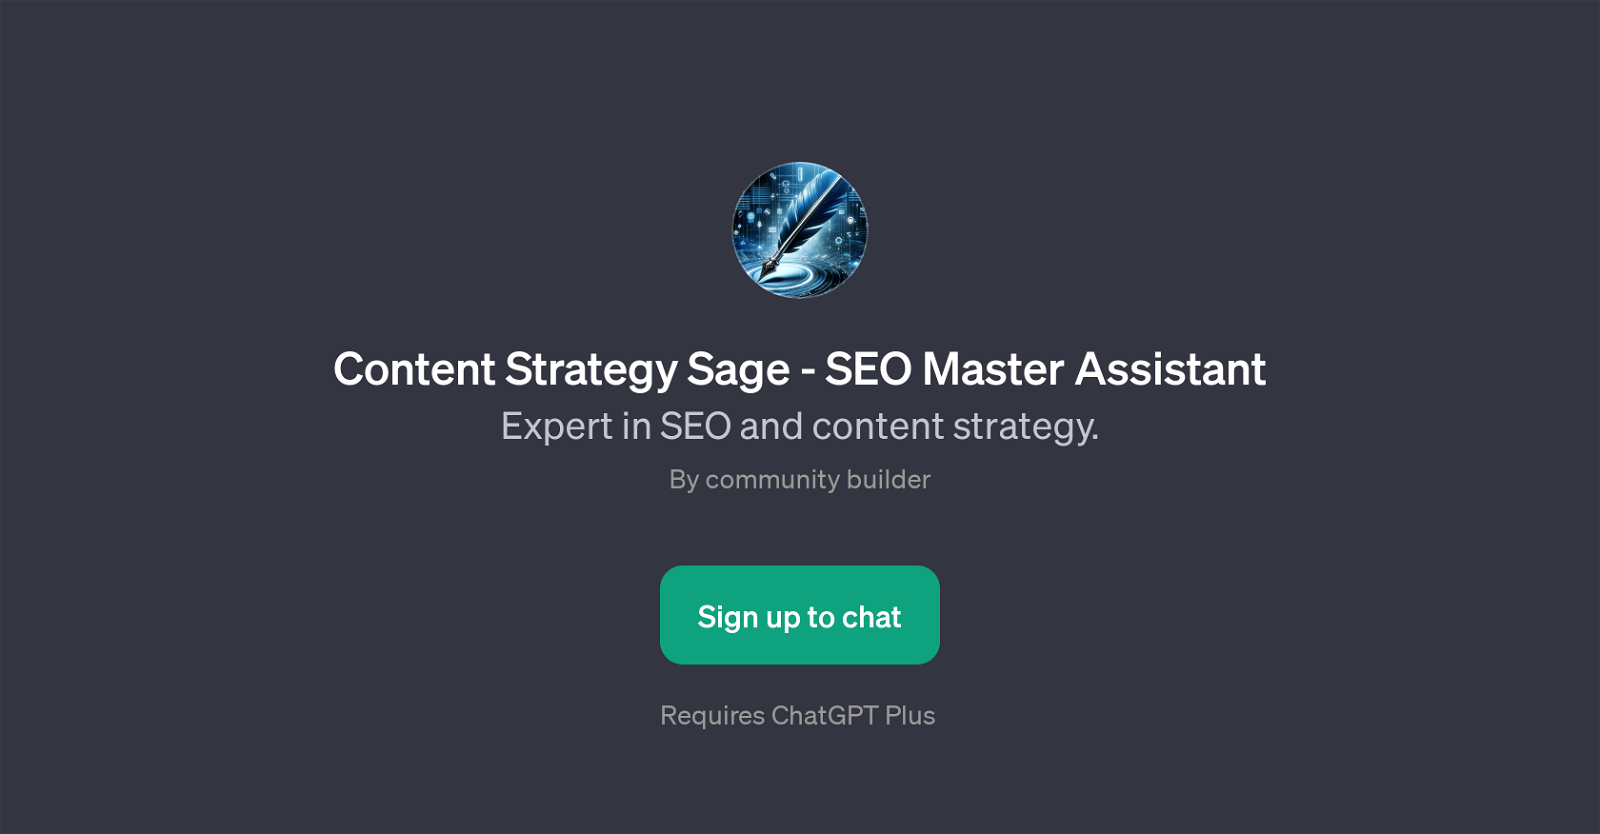 Content Strategy Sage - SEO Master Assistant website